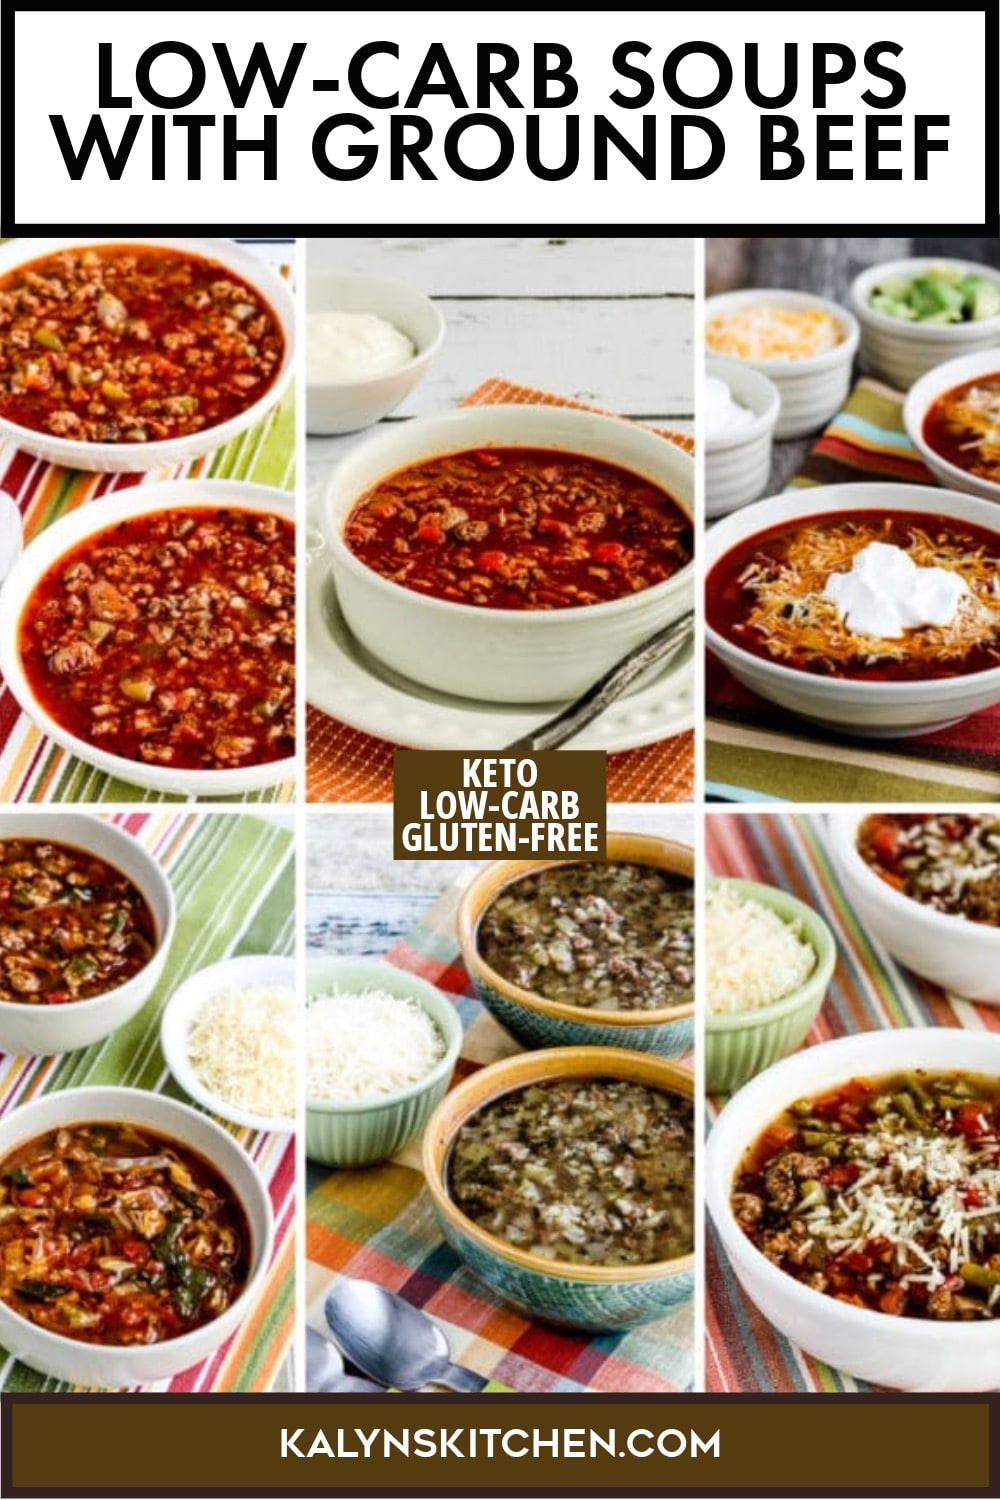 Pinterest image of Low-Carb Soups with Ground Beef